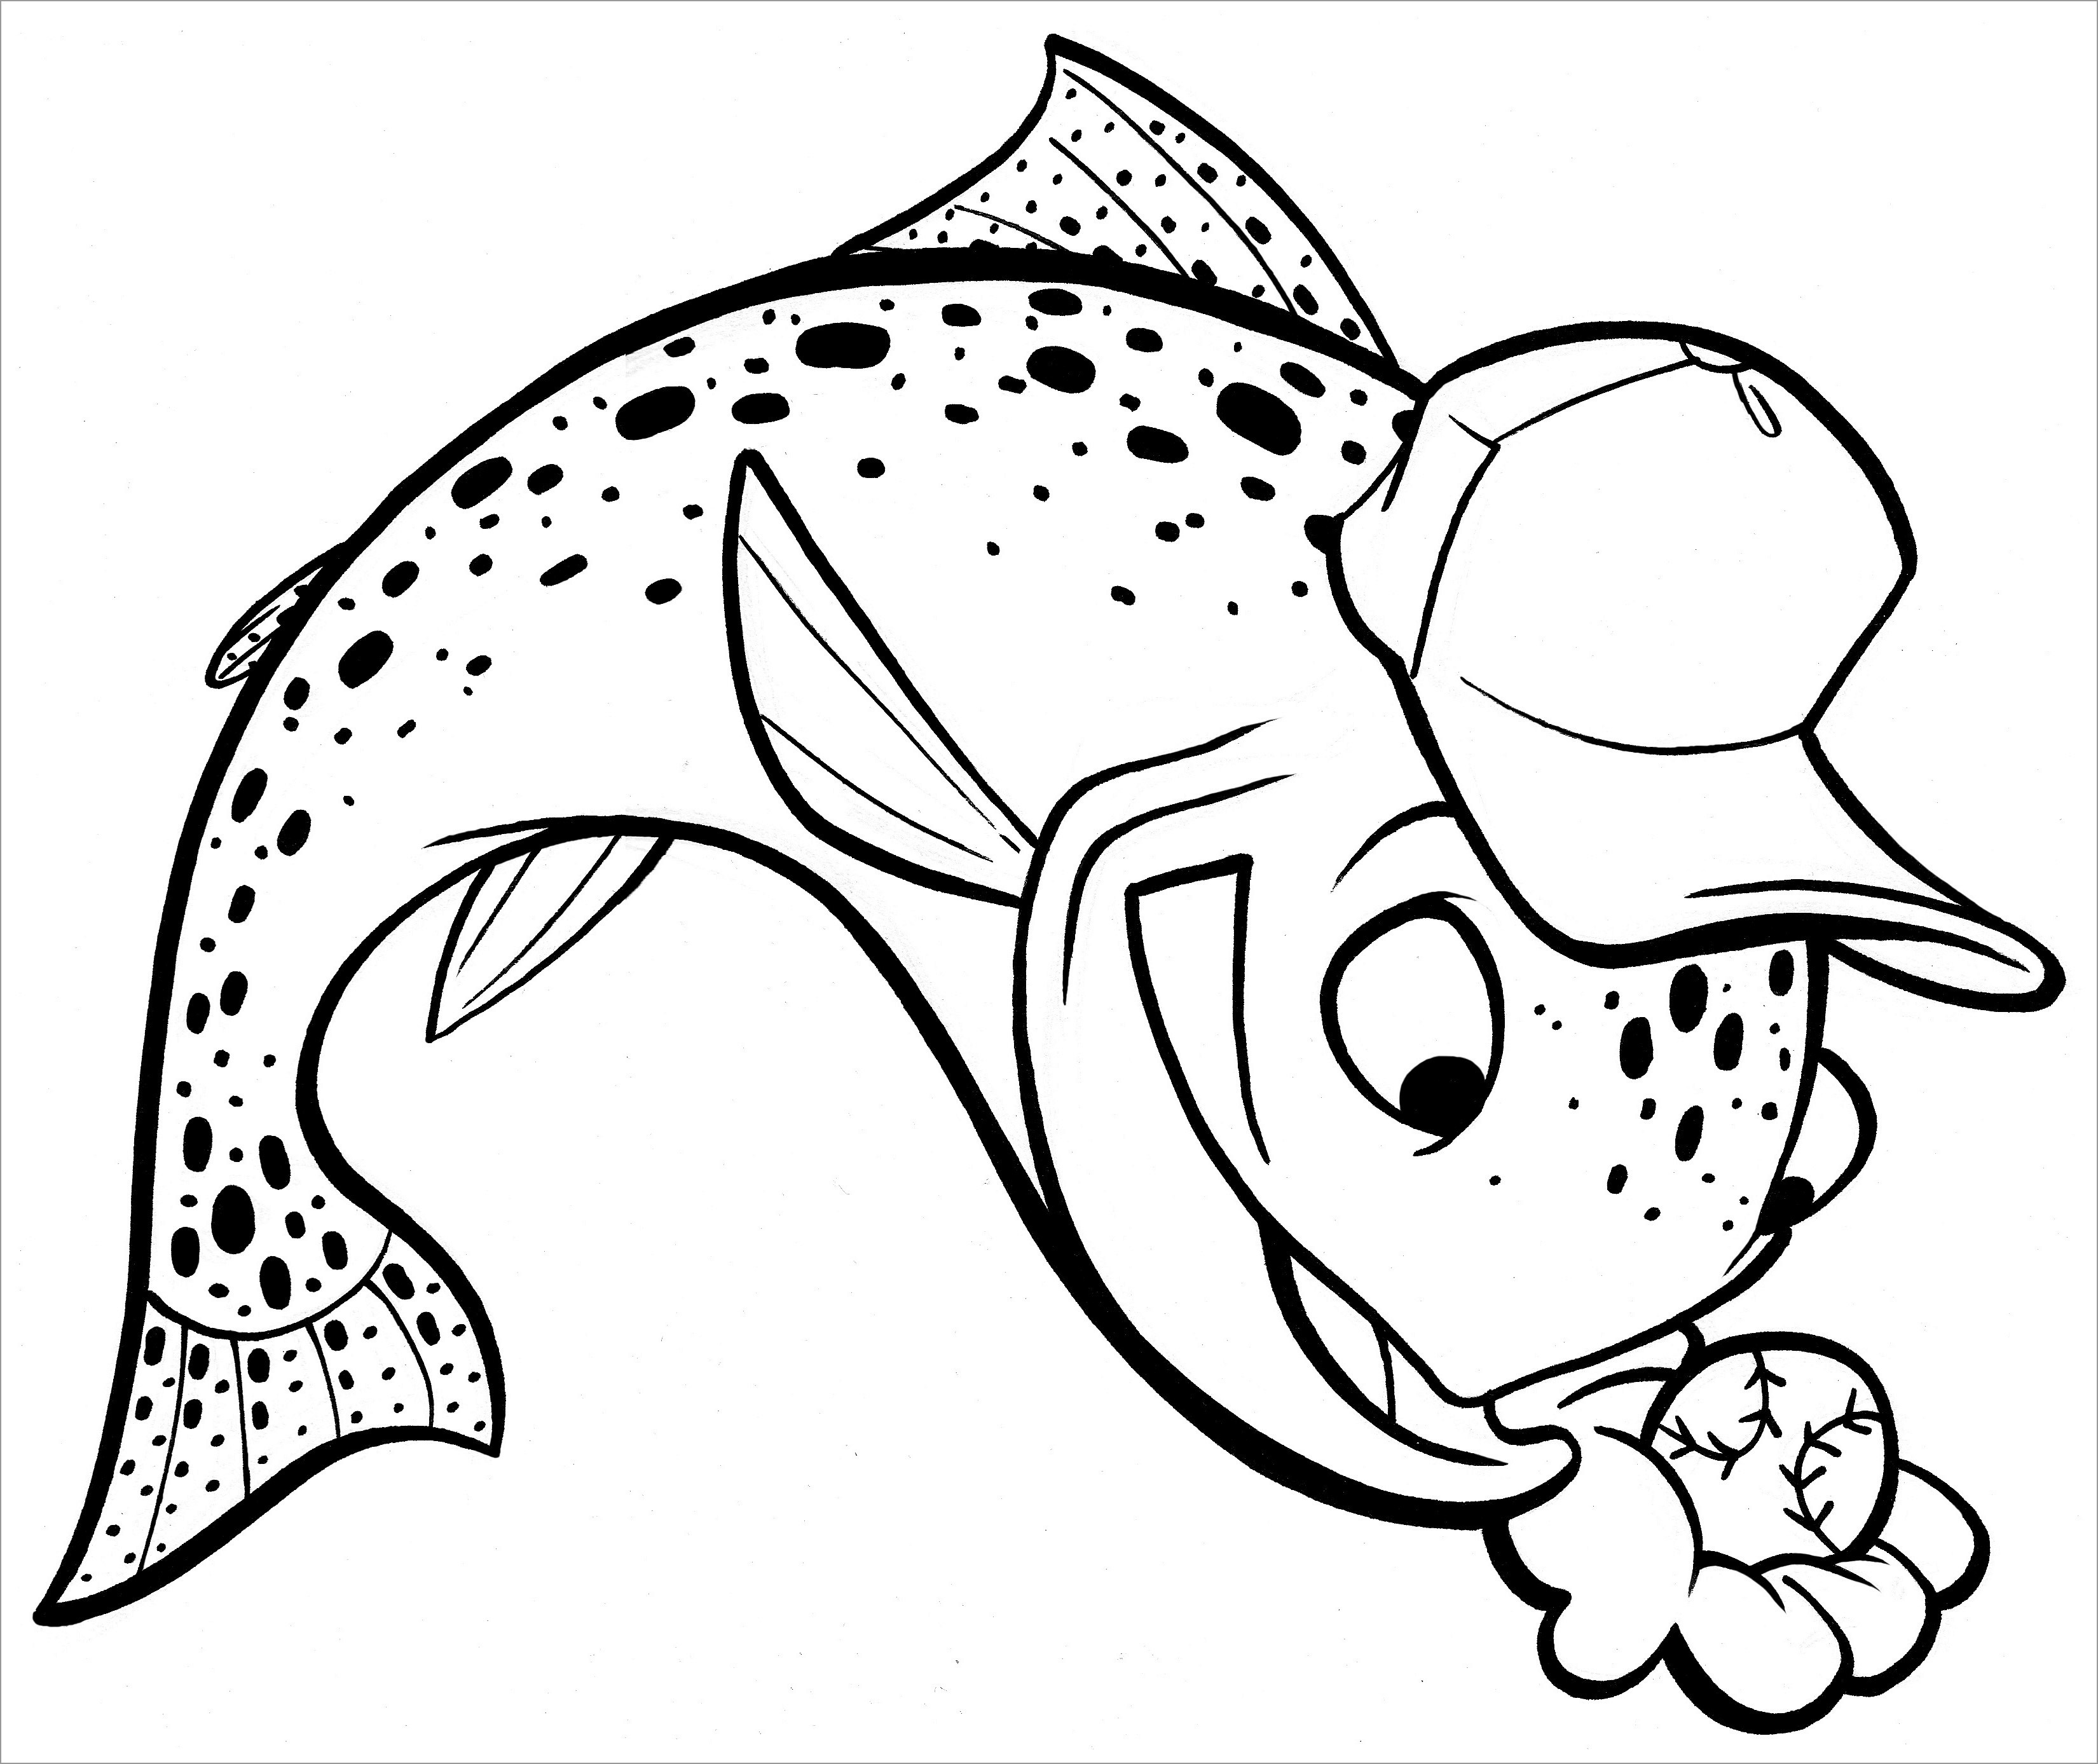 Mike Trout Coloring Page